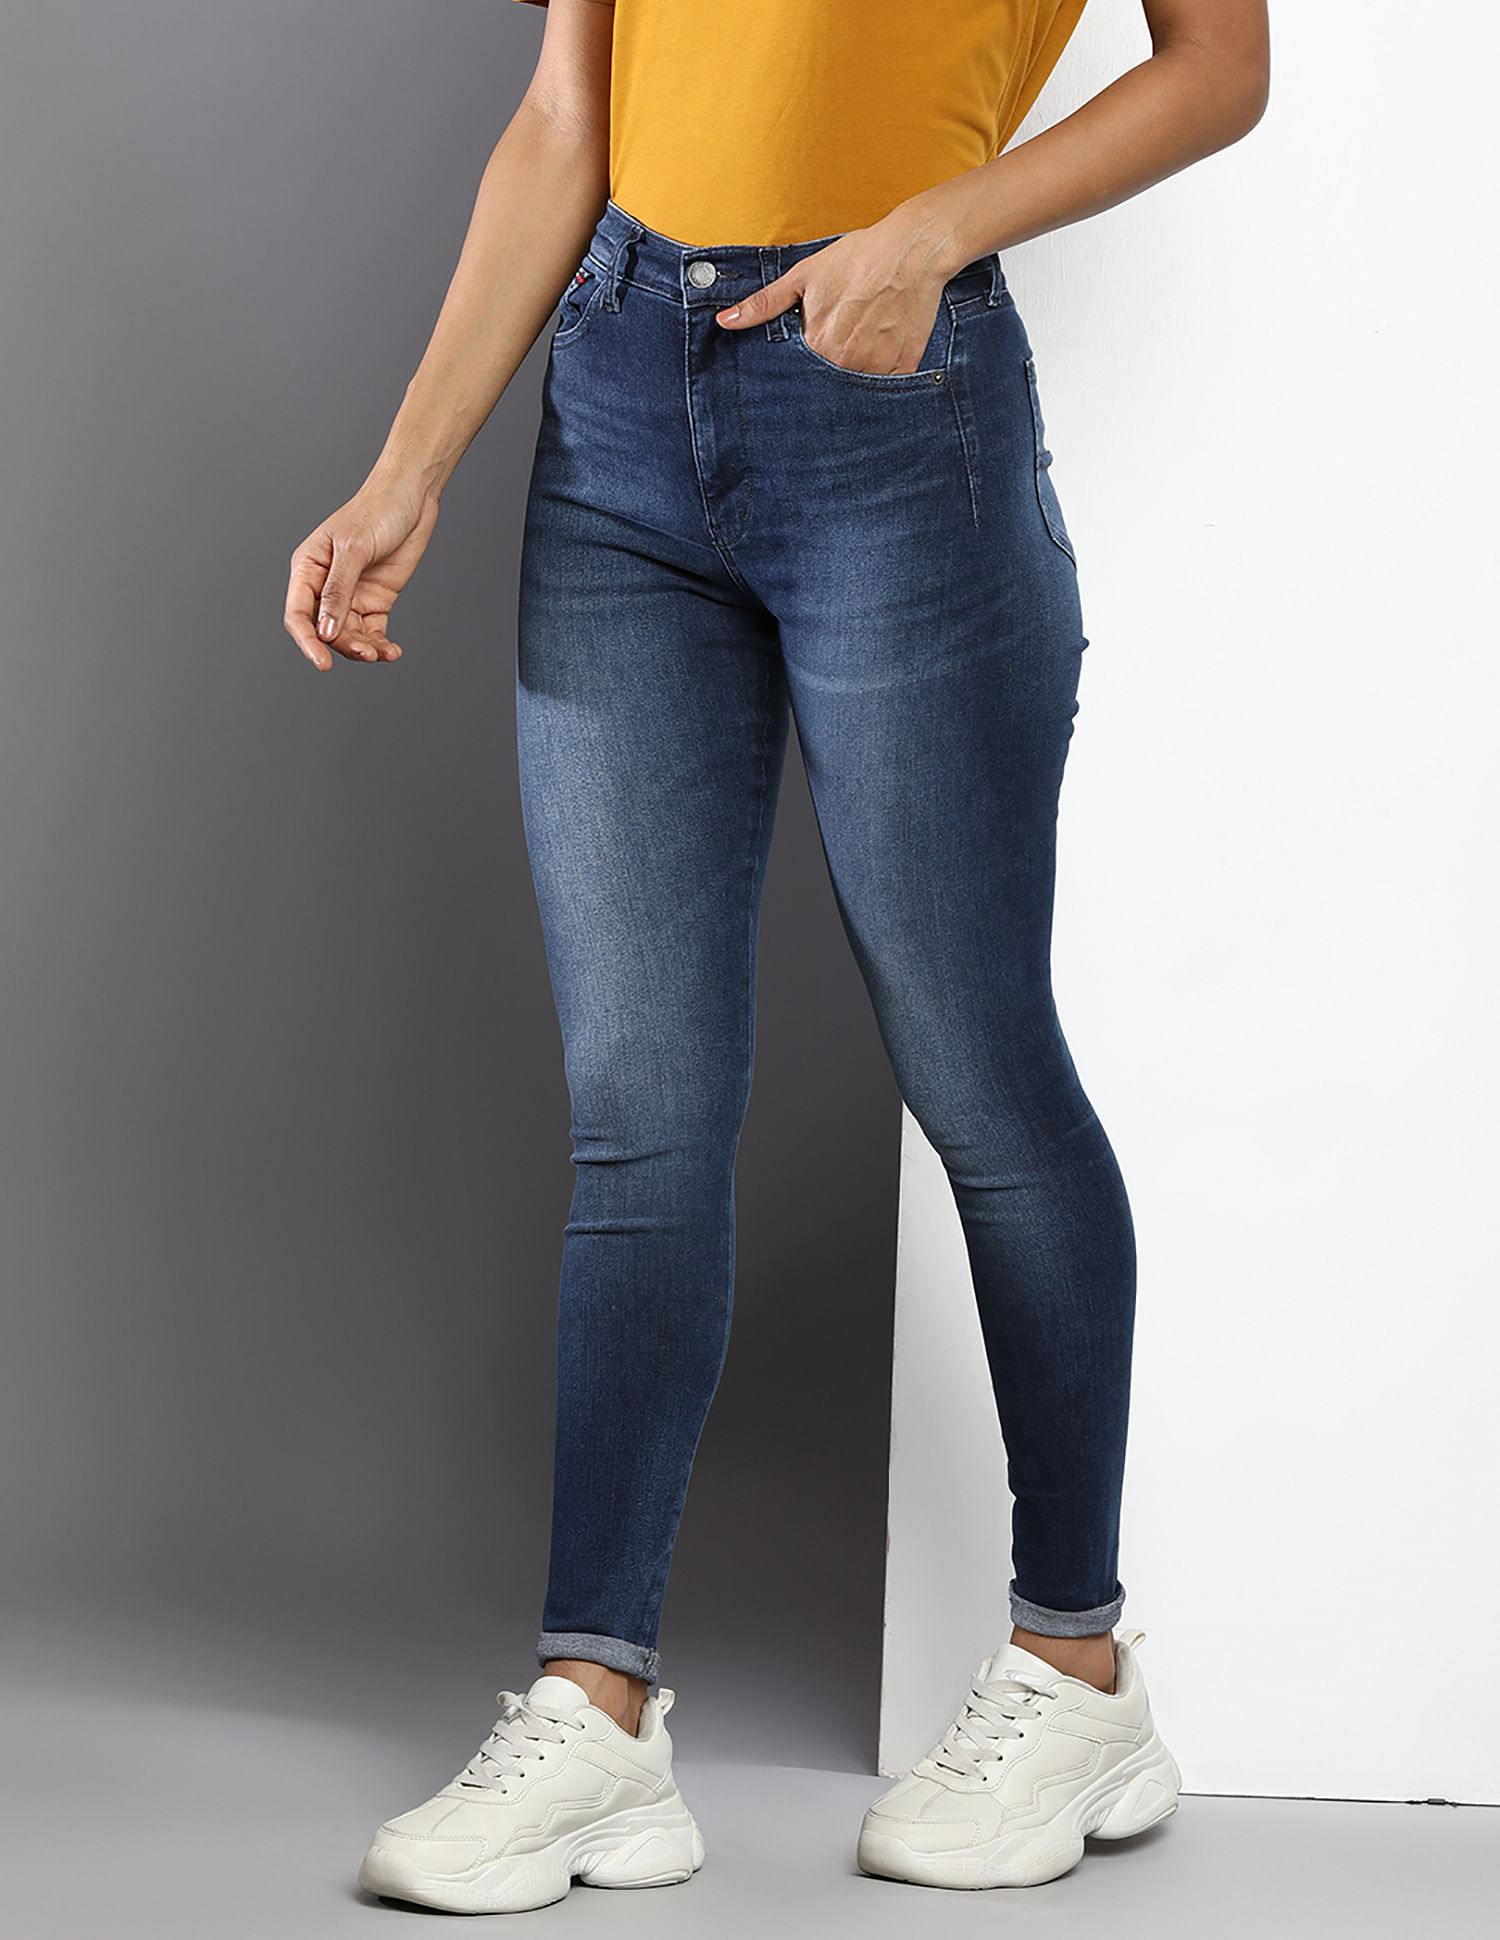 Jeans Buy Tommy Rise Mid Hilfiger Fit Skinny Sylvia